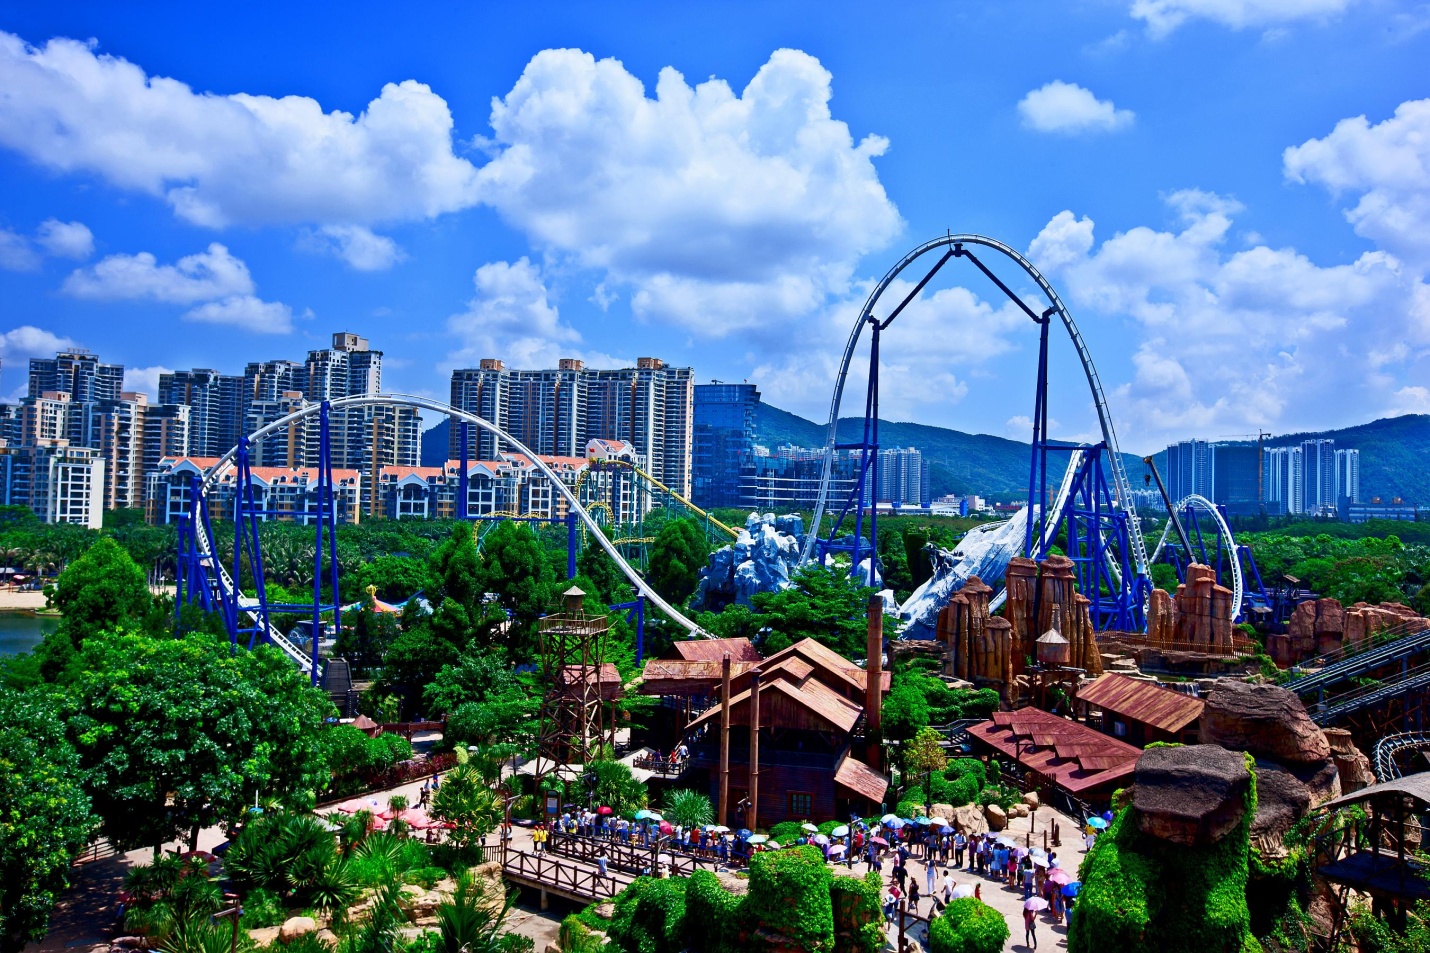 Tour And Travel Planner Some Of The Topmost Theme Parks In China